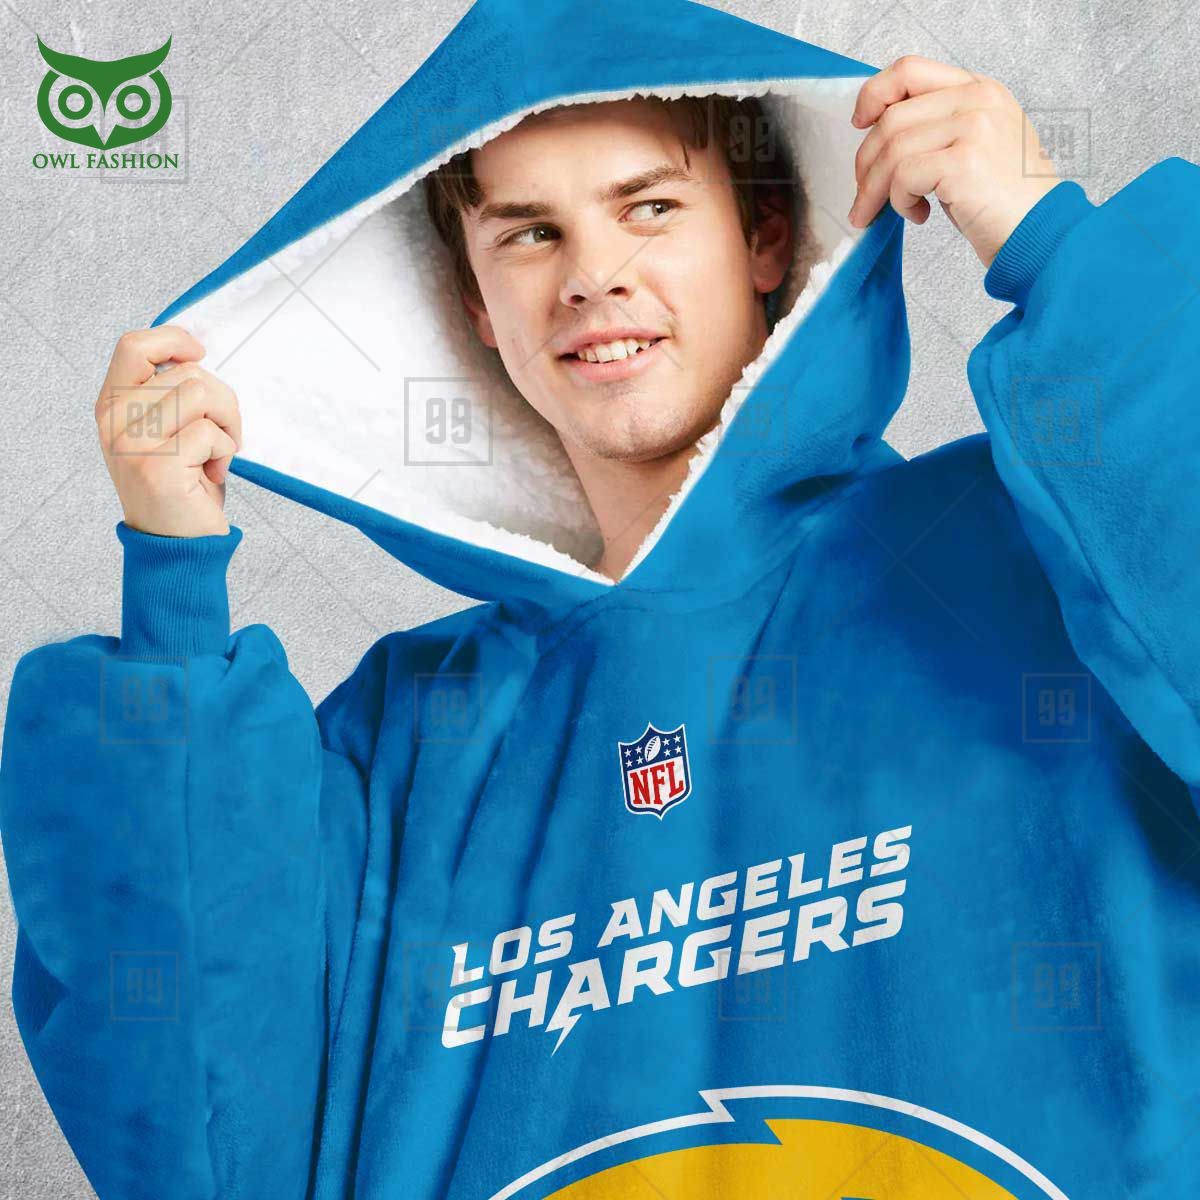 los angeles chargers american league nfl customized snuggie hoodie 2 Z42xv